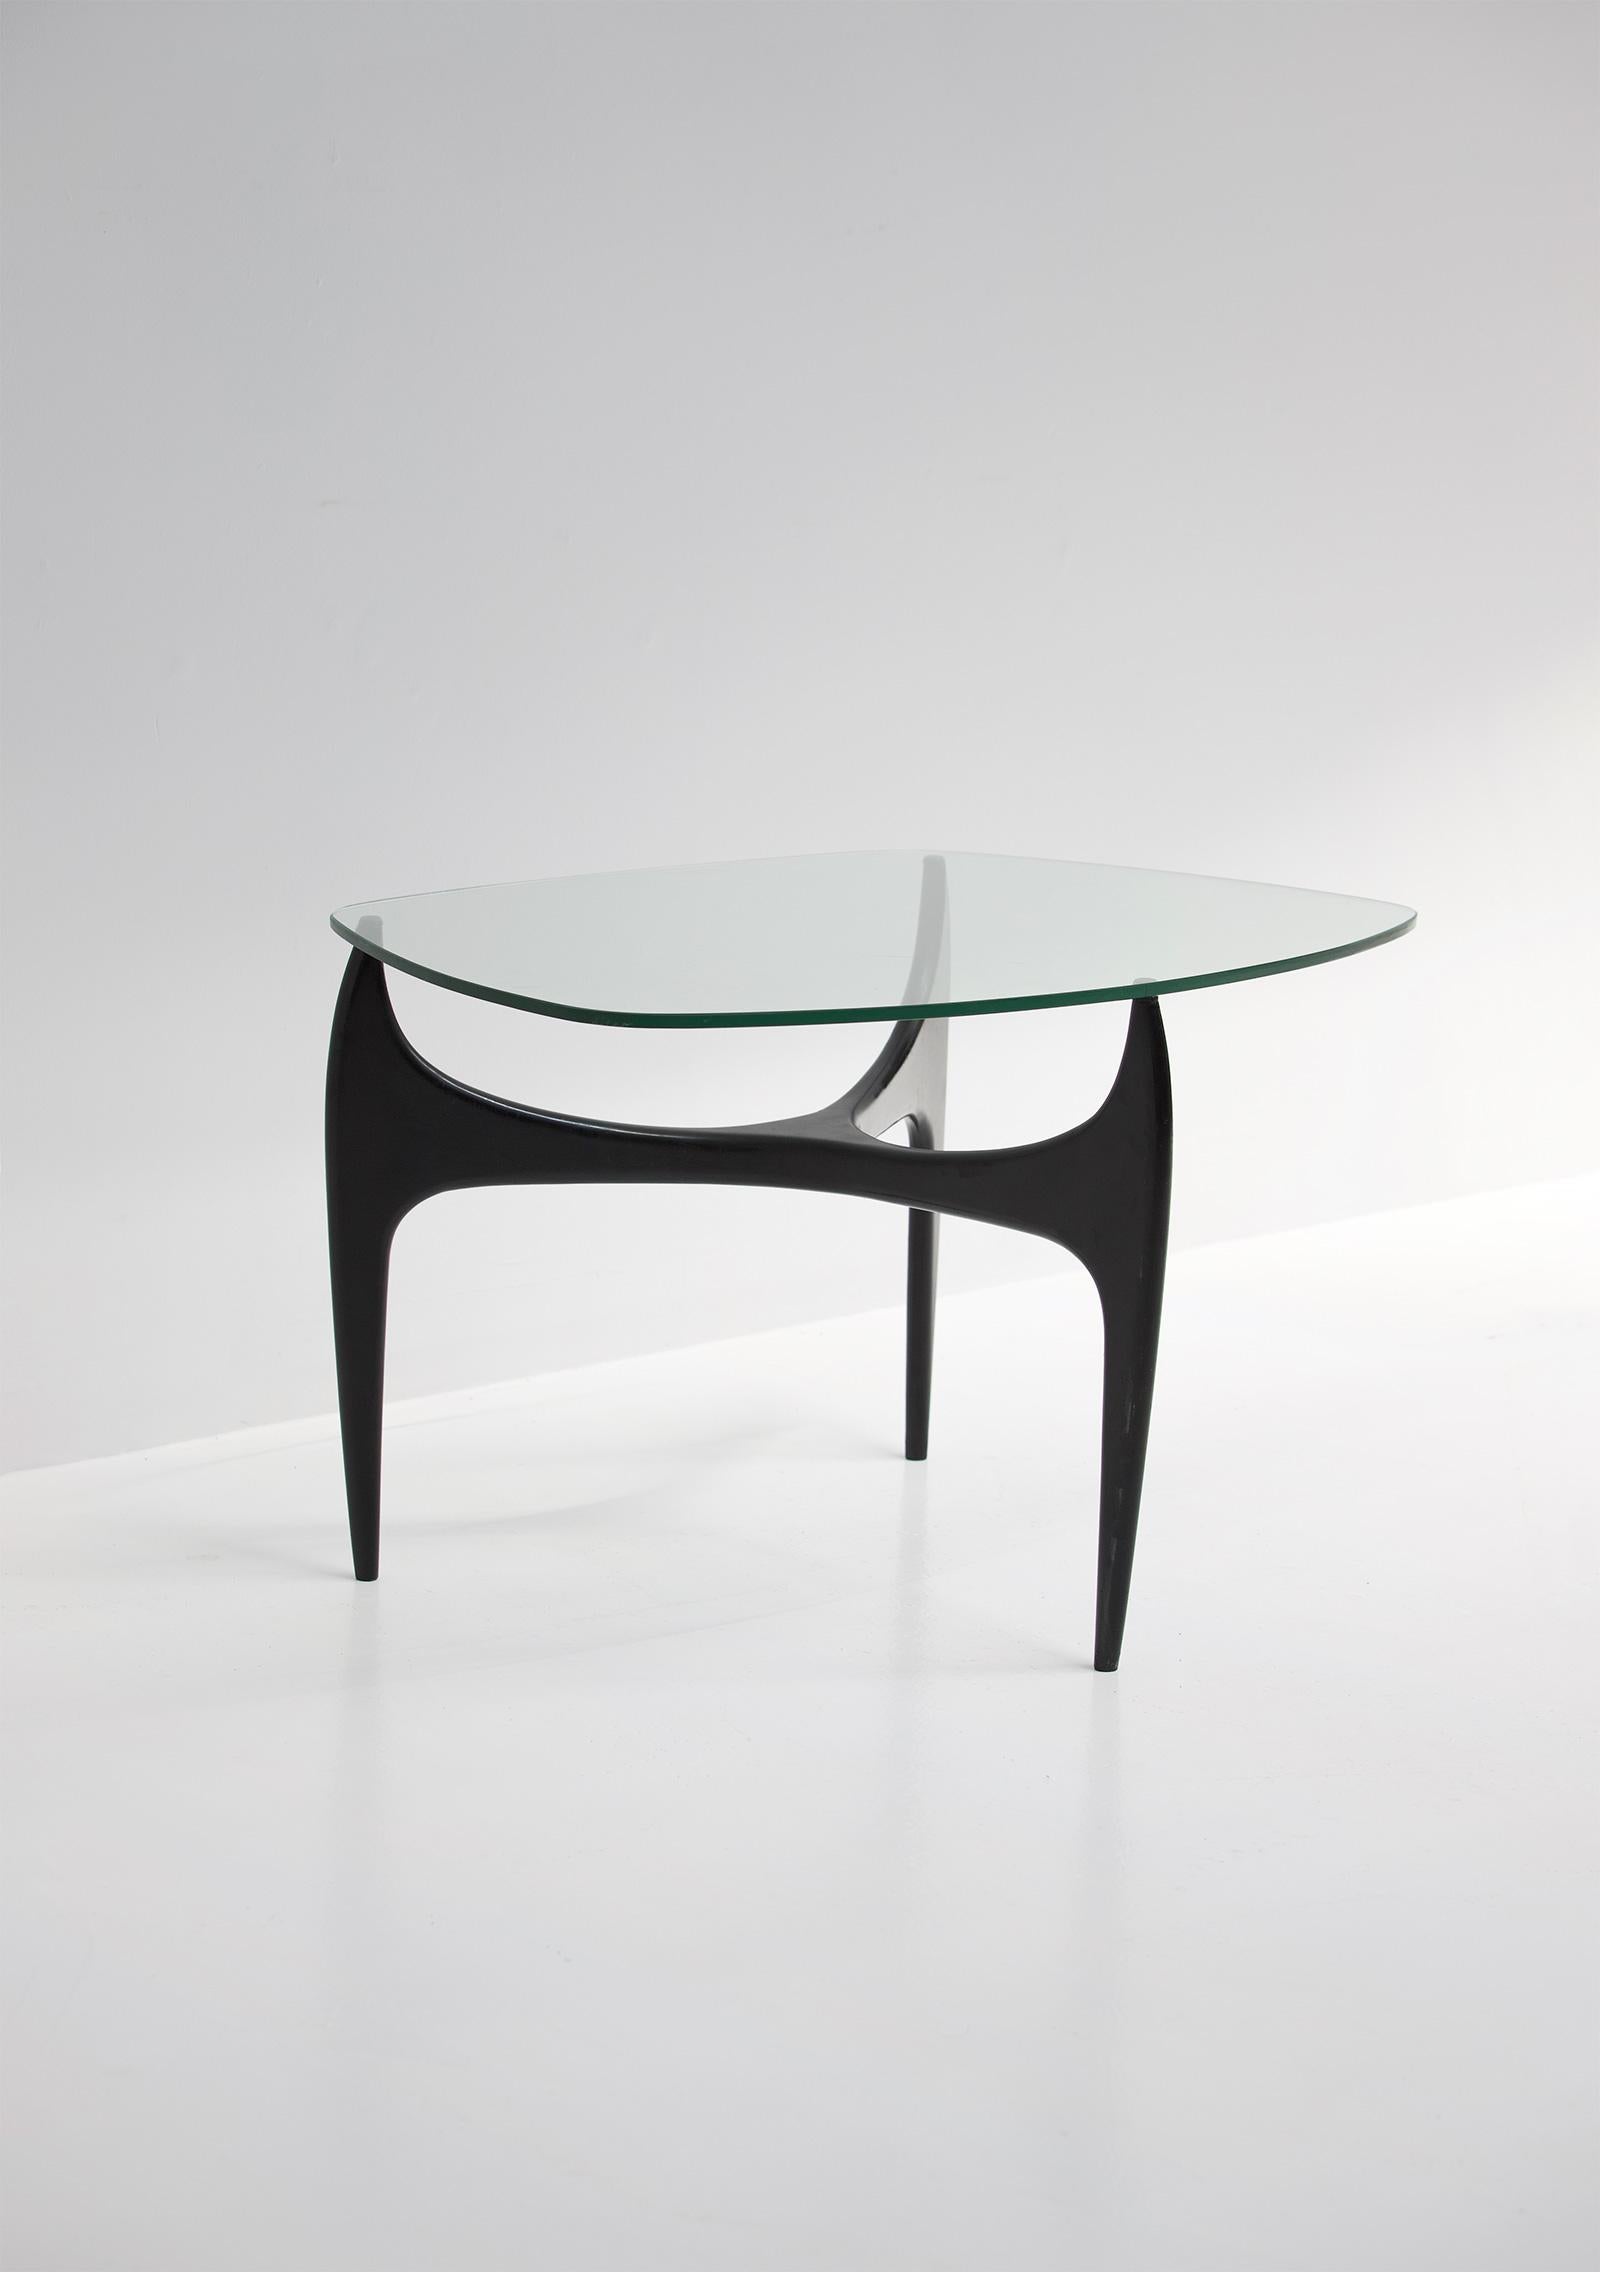 Jos De Mey for Luxus Coffee Table with Black Lacquered Wood & Glass Top In Good Condition For Sale In Antwerpen, Antwerp